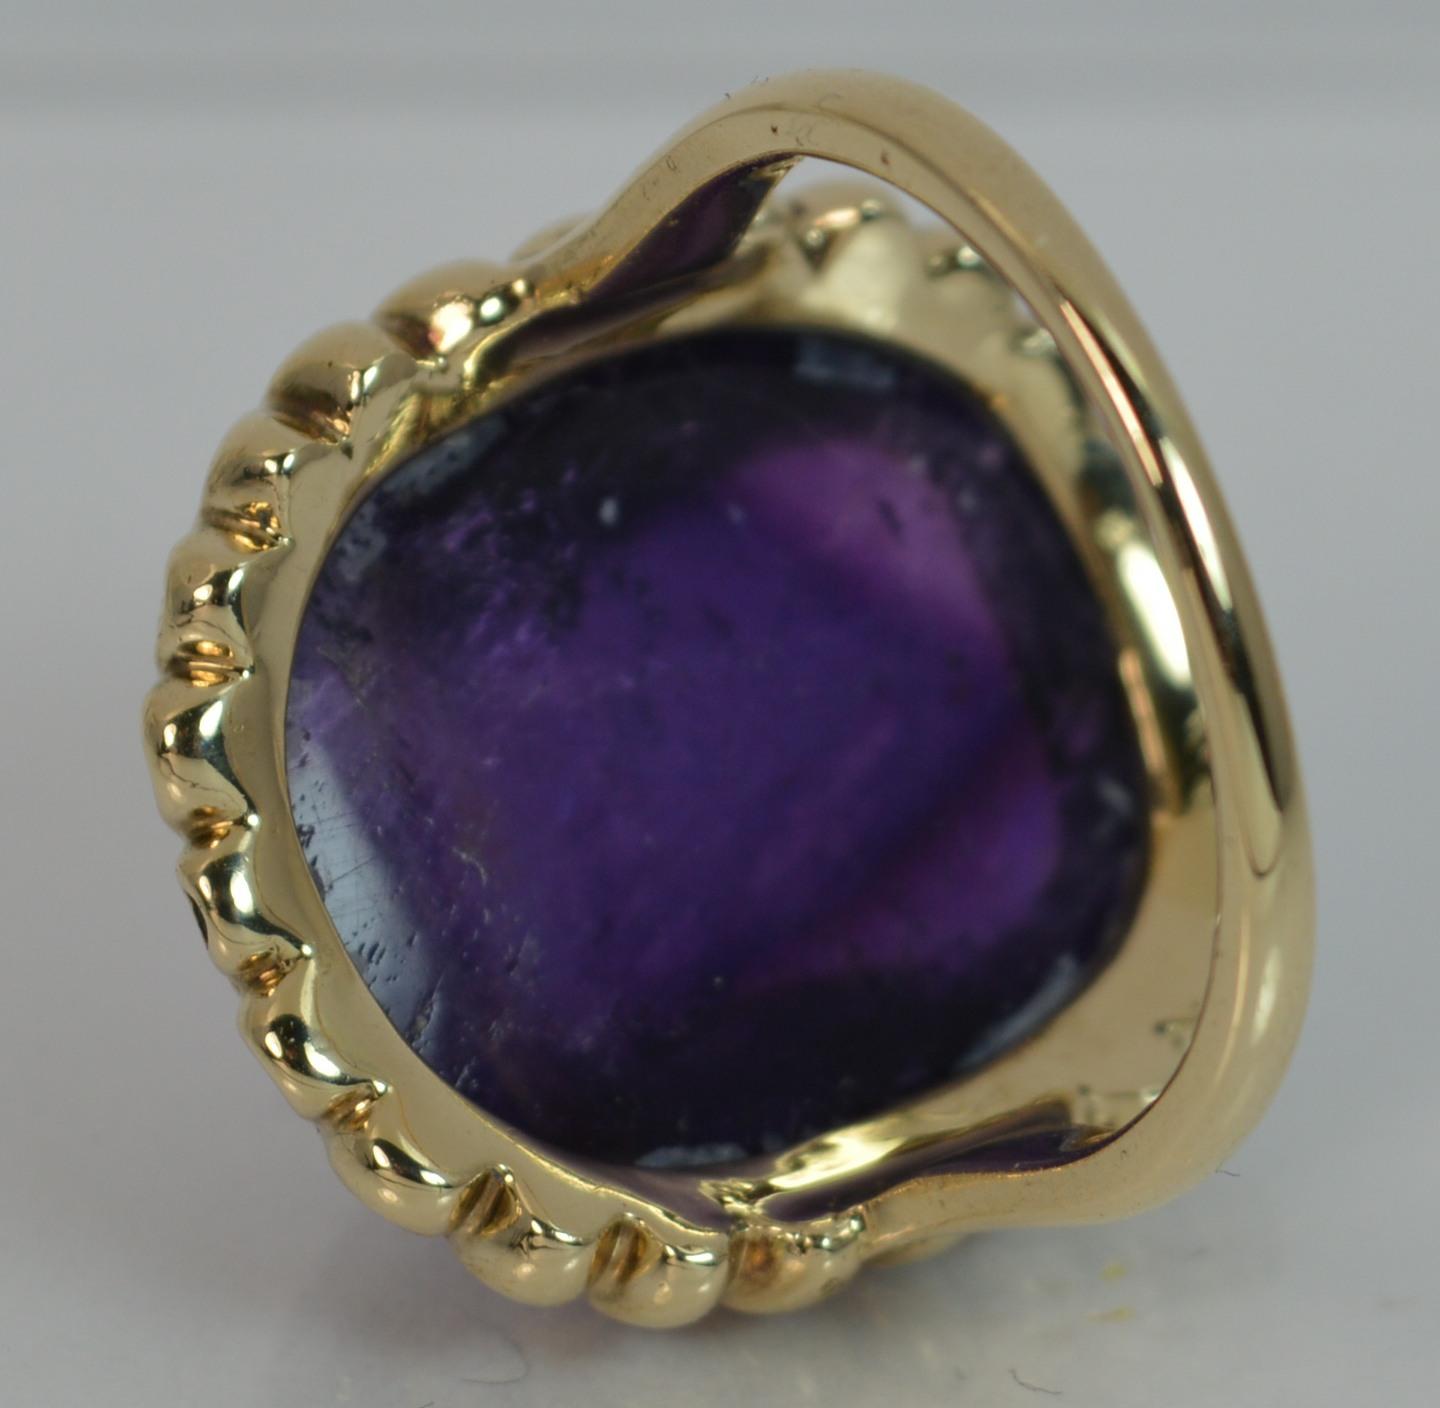 Huge Amethyst Cabochon Solitaire and Yellow Gold Ring 6